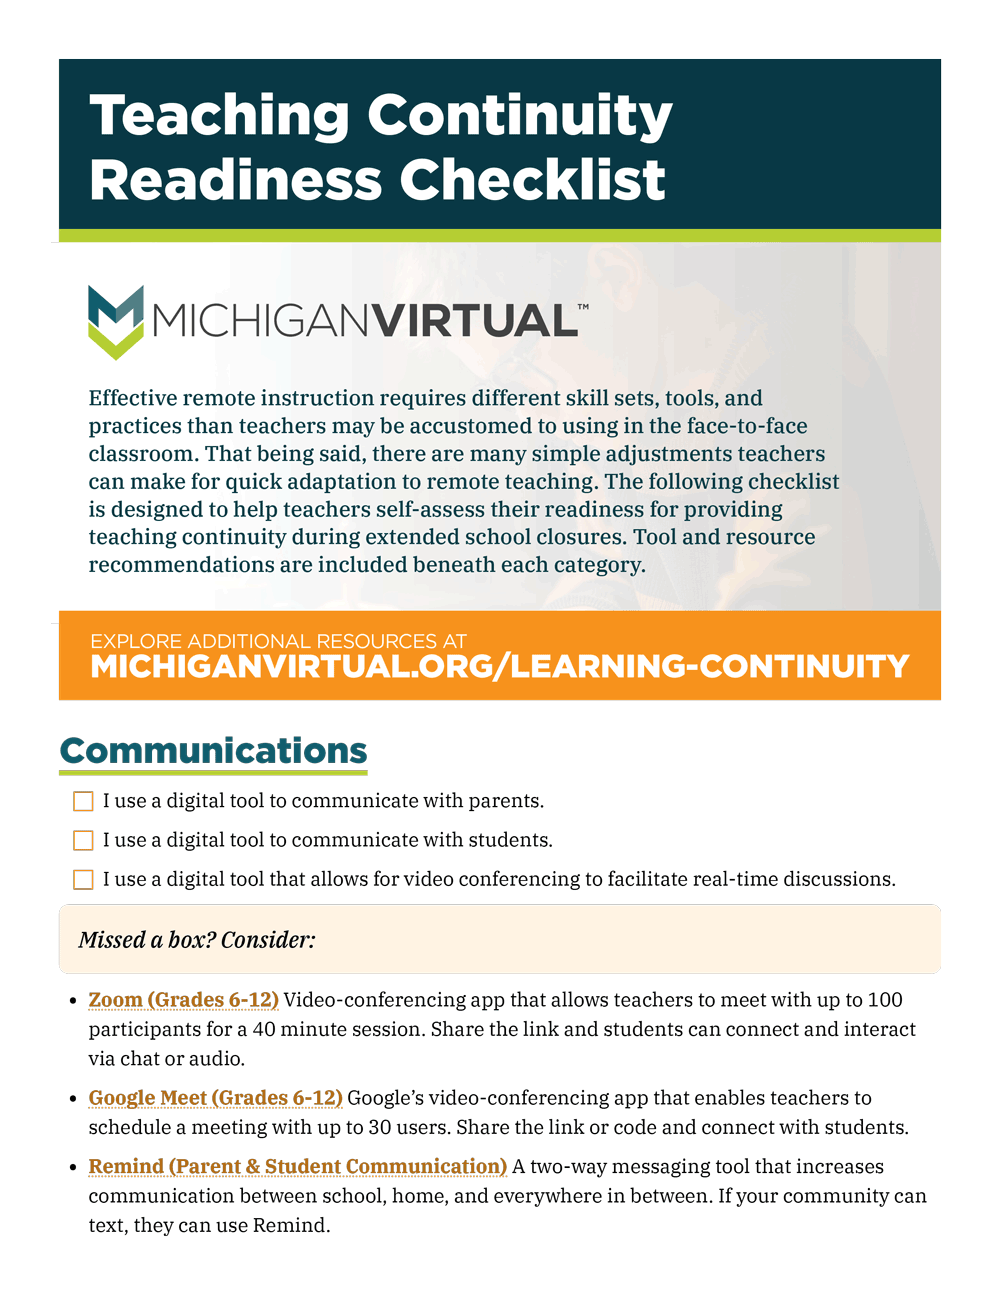 Teaching Continuity Readiness Checklist Preview